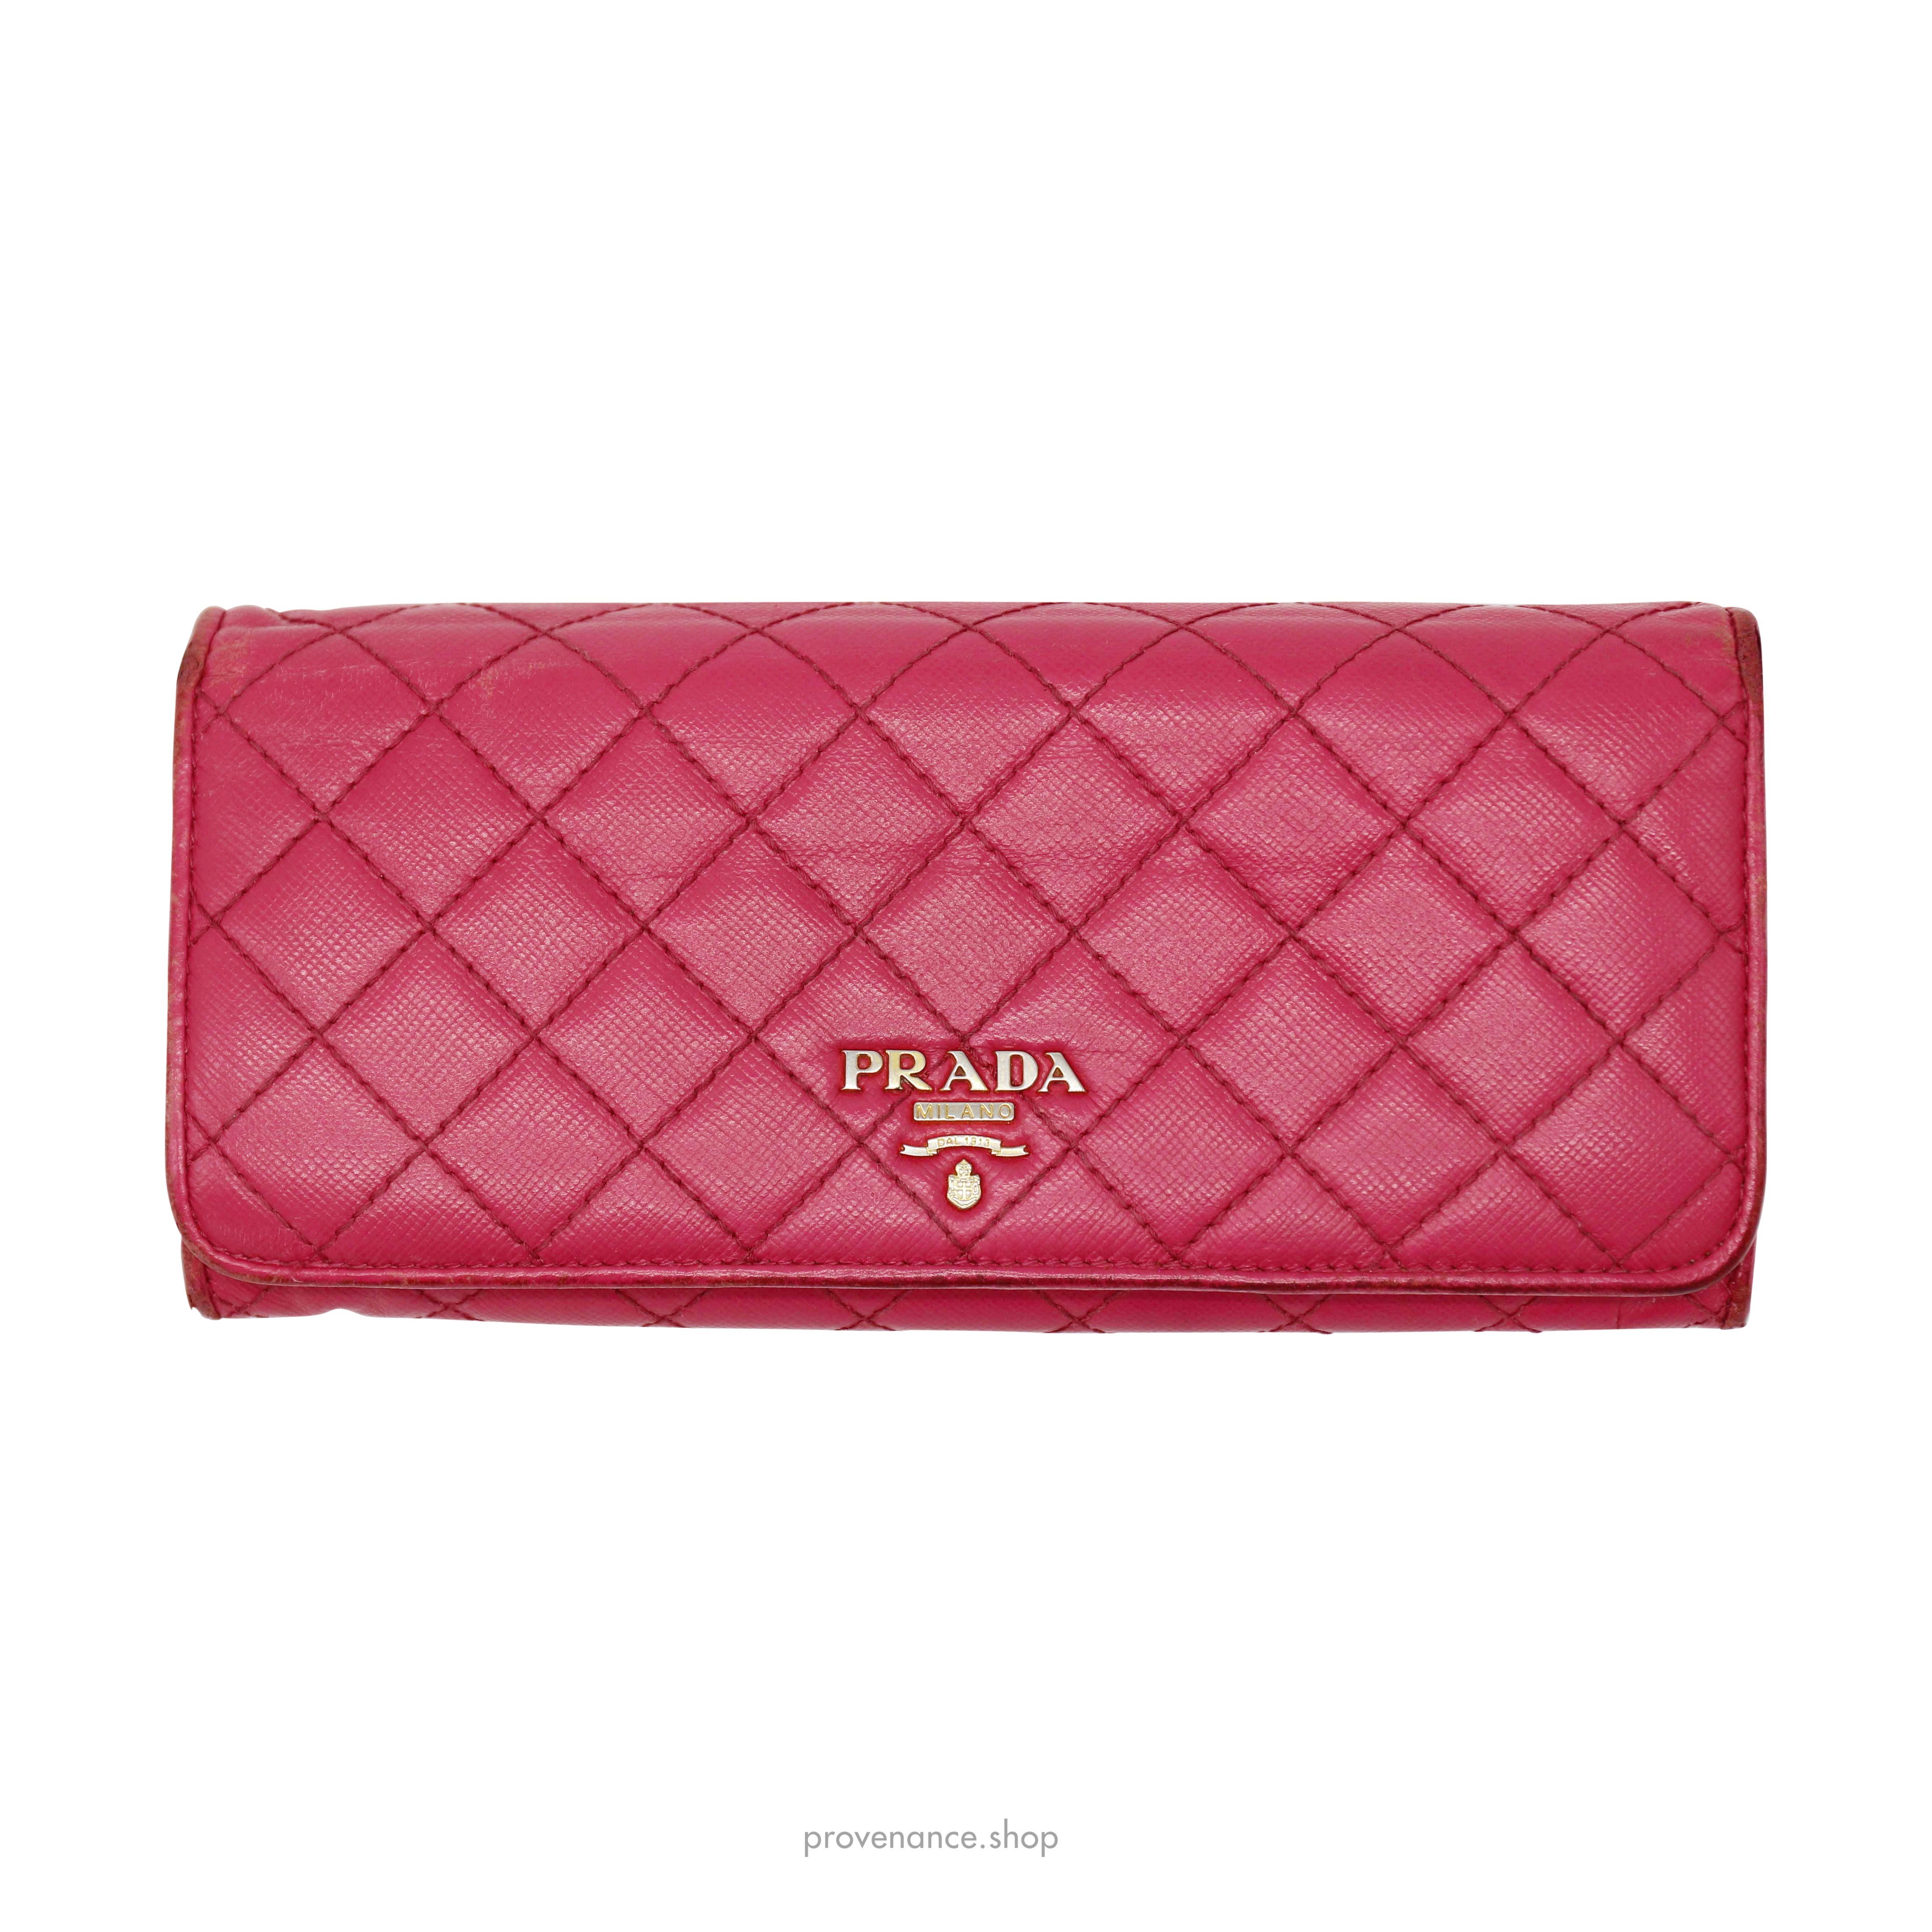 Prada Long Wallet - Pink Quilted Saffiano Leather - 2